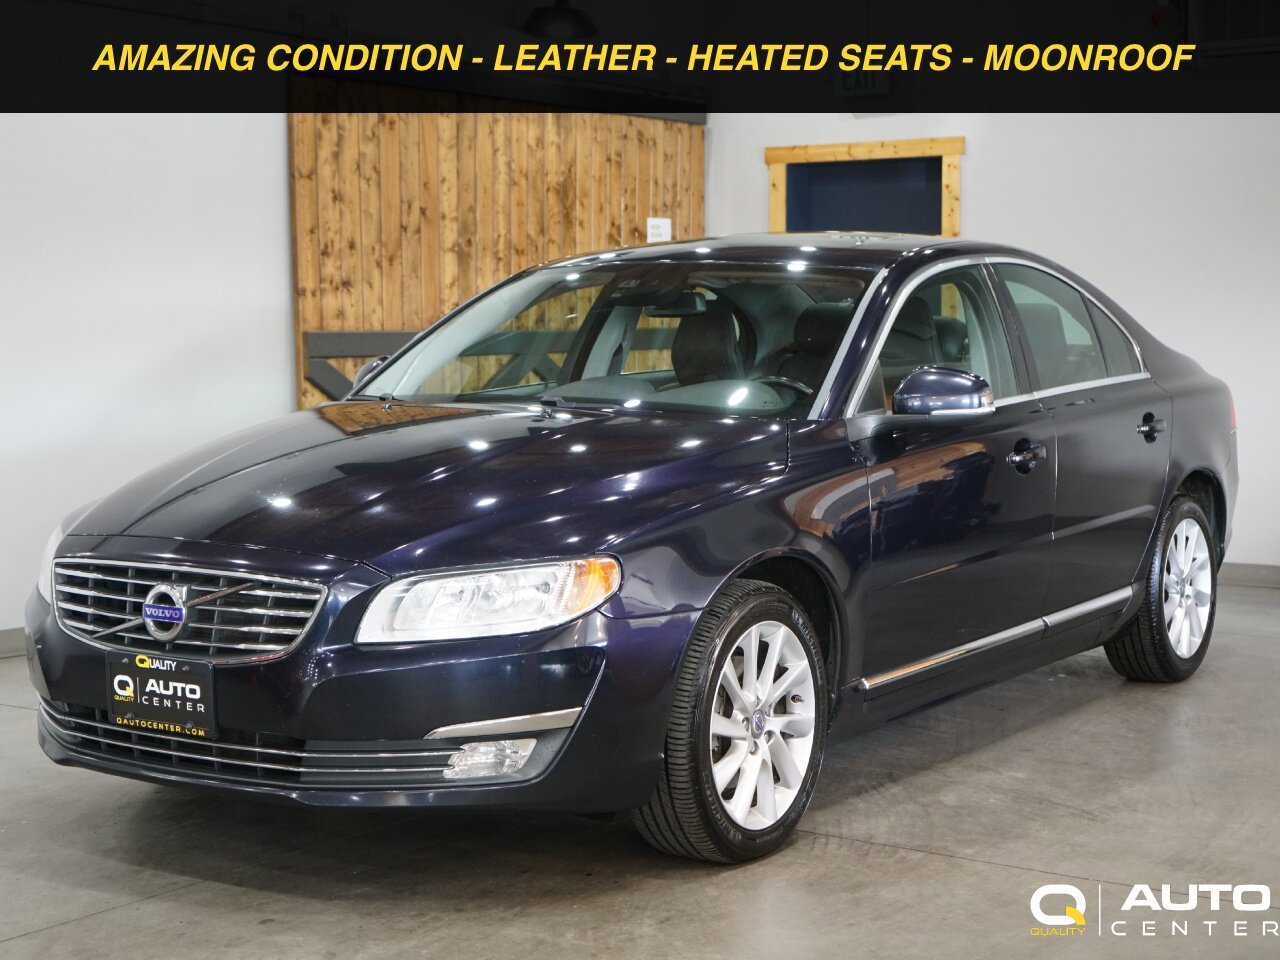 Used Volvo S80 for Sale Right Now - Autotrader